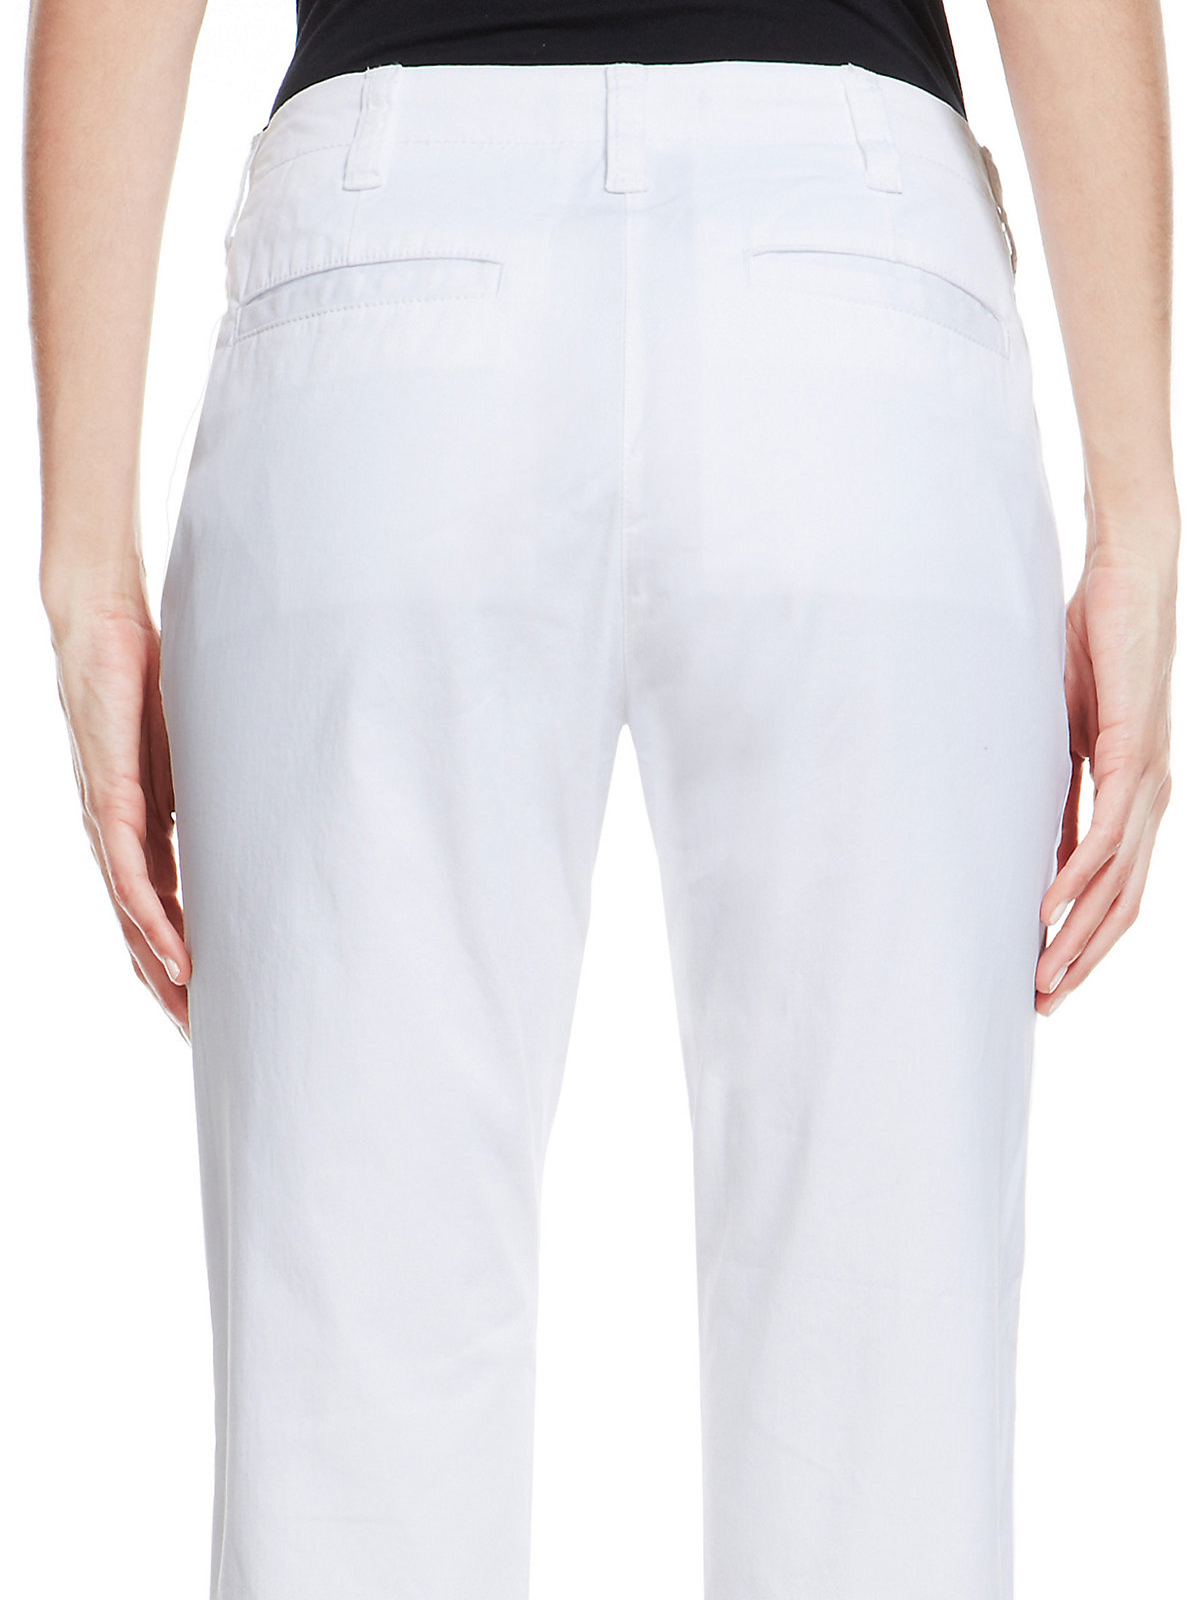 Marks and Spencer - - M&5 WHITE Cotton Rich Cropped Trousers - Plus Size 22